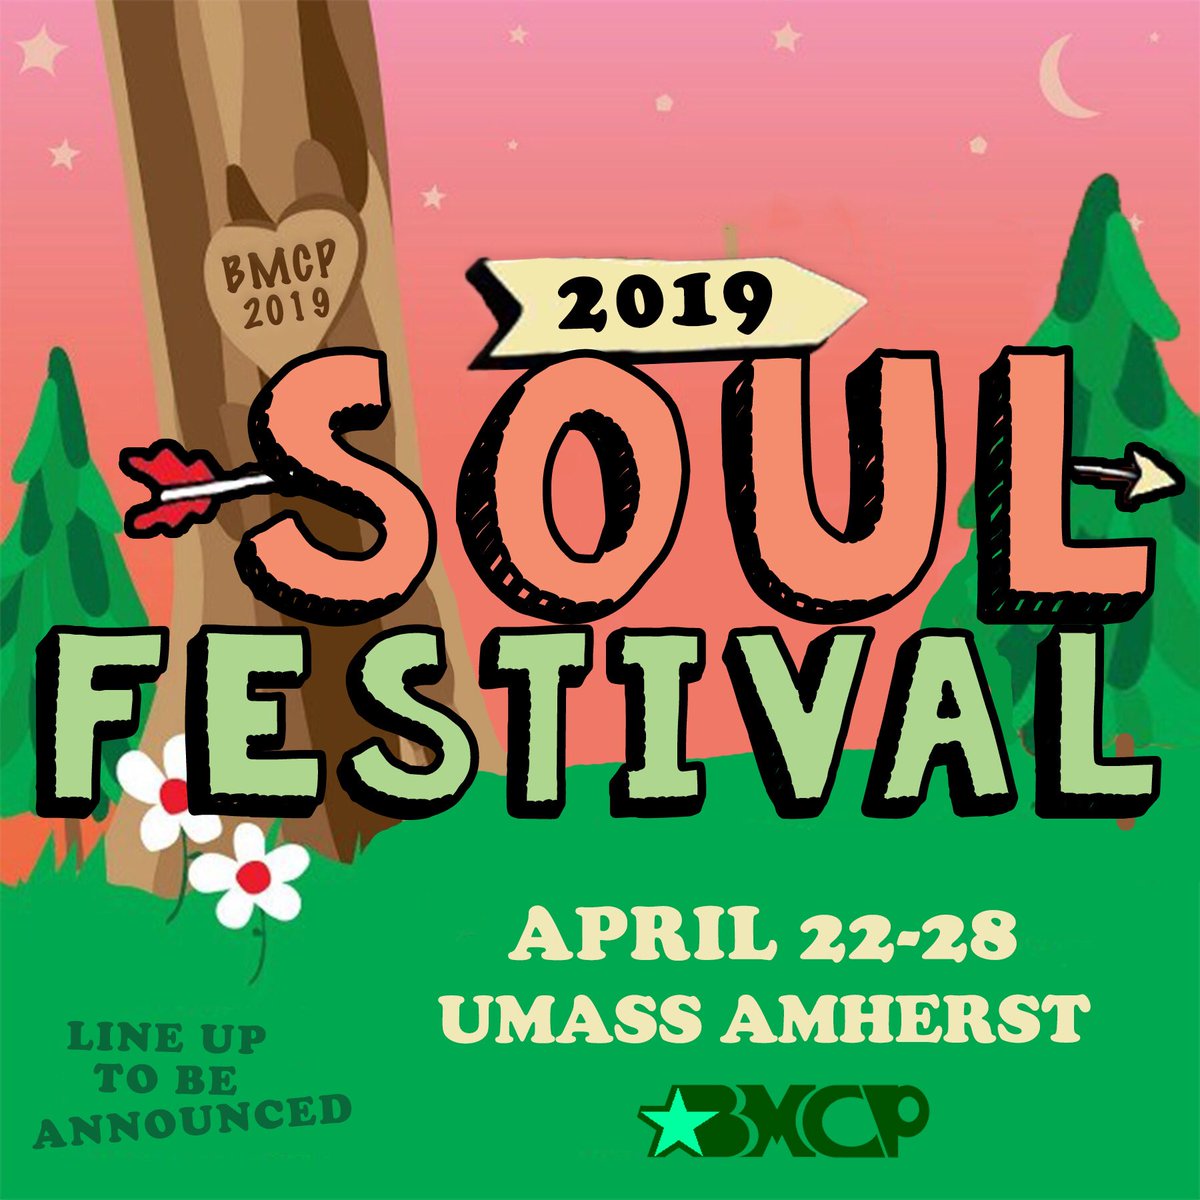 Soul Festival dates are here!! #Soulfest2019 #SoulFestival #SoulFestival2019 #UMassBMCP #BMCP #tipoftheiceberg #staytuned